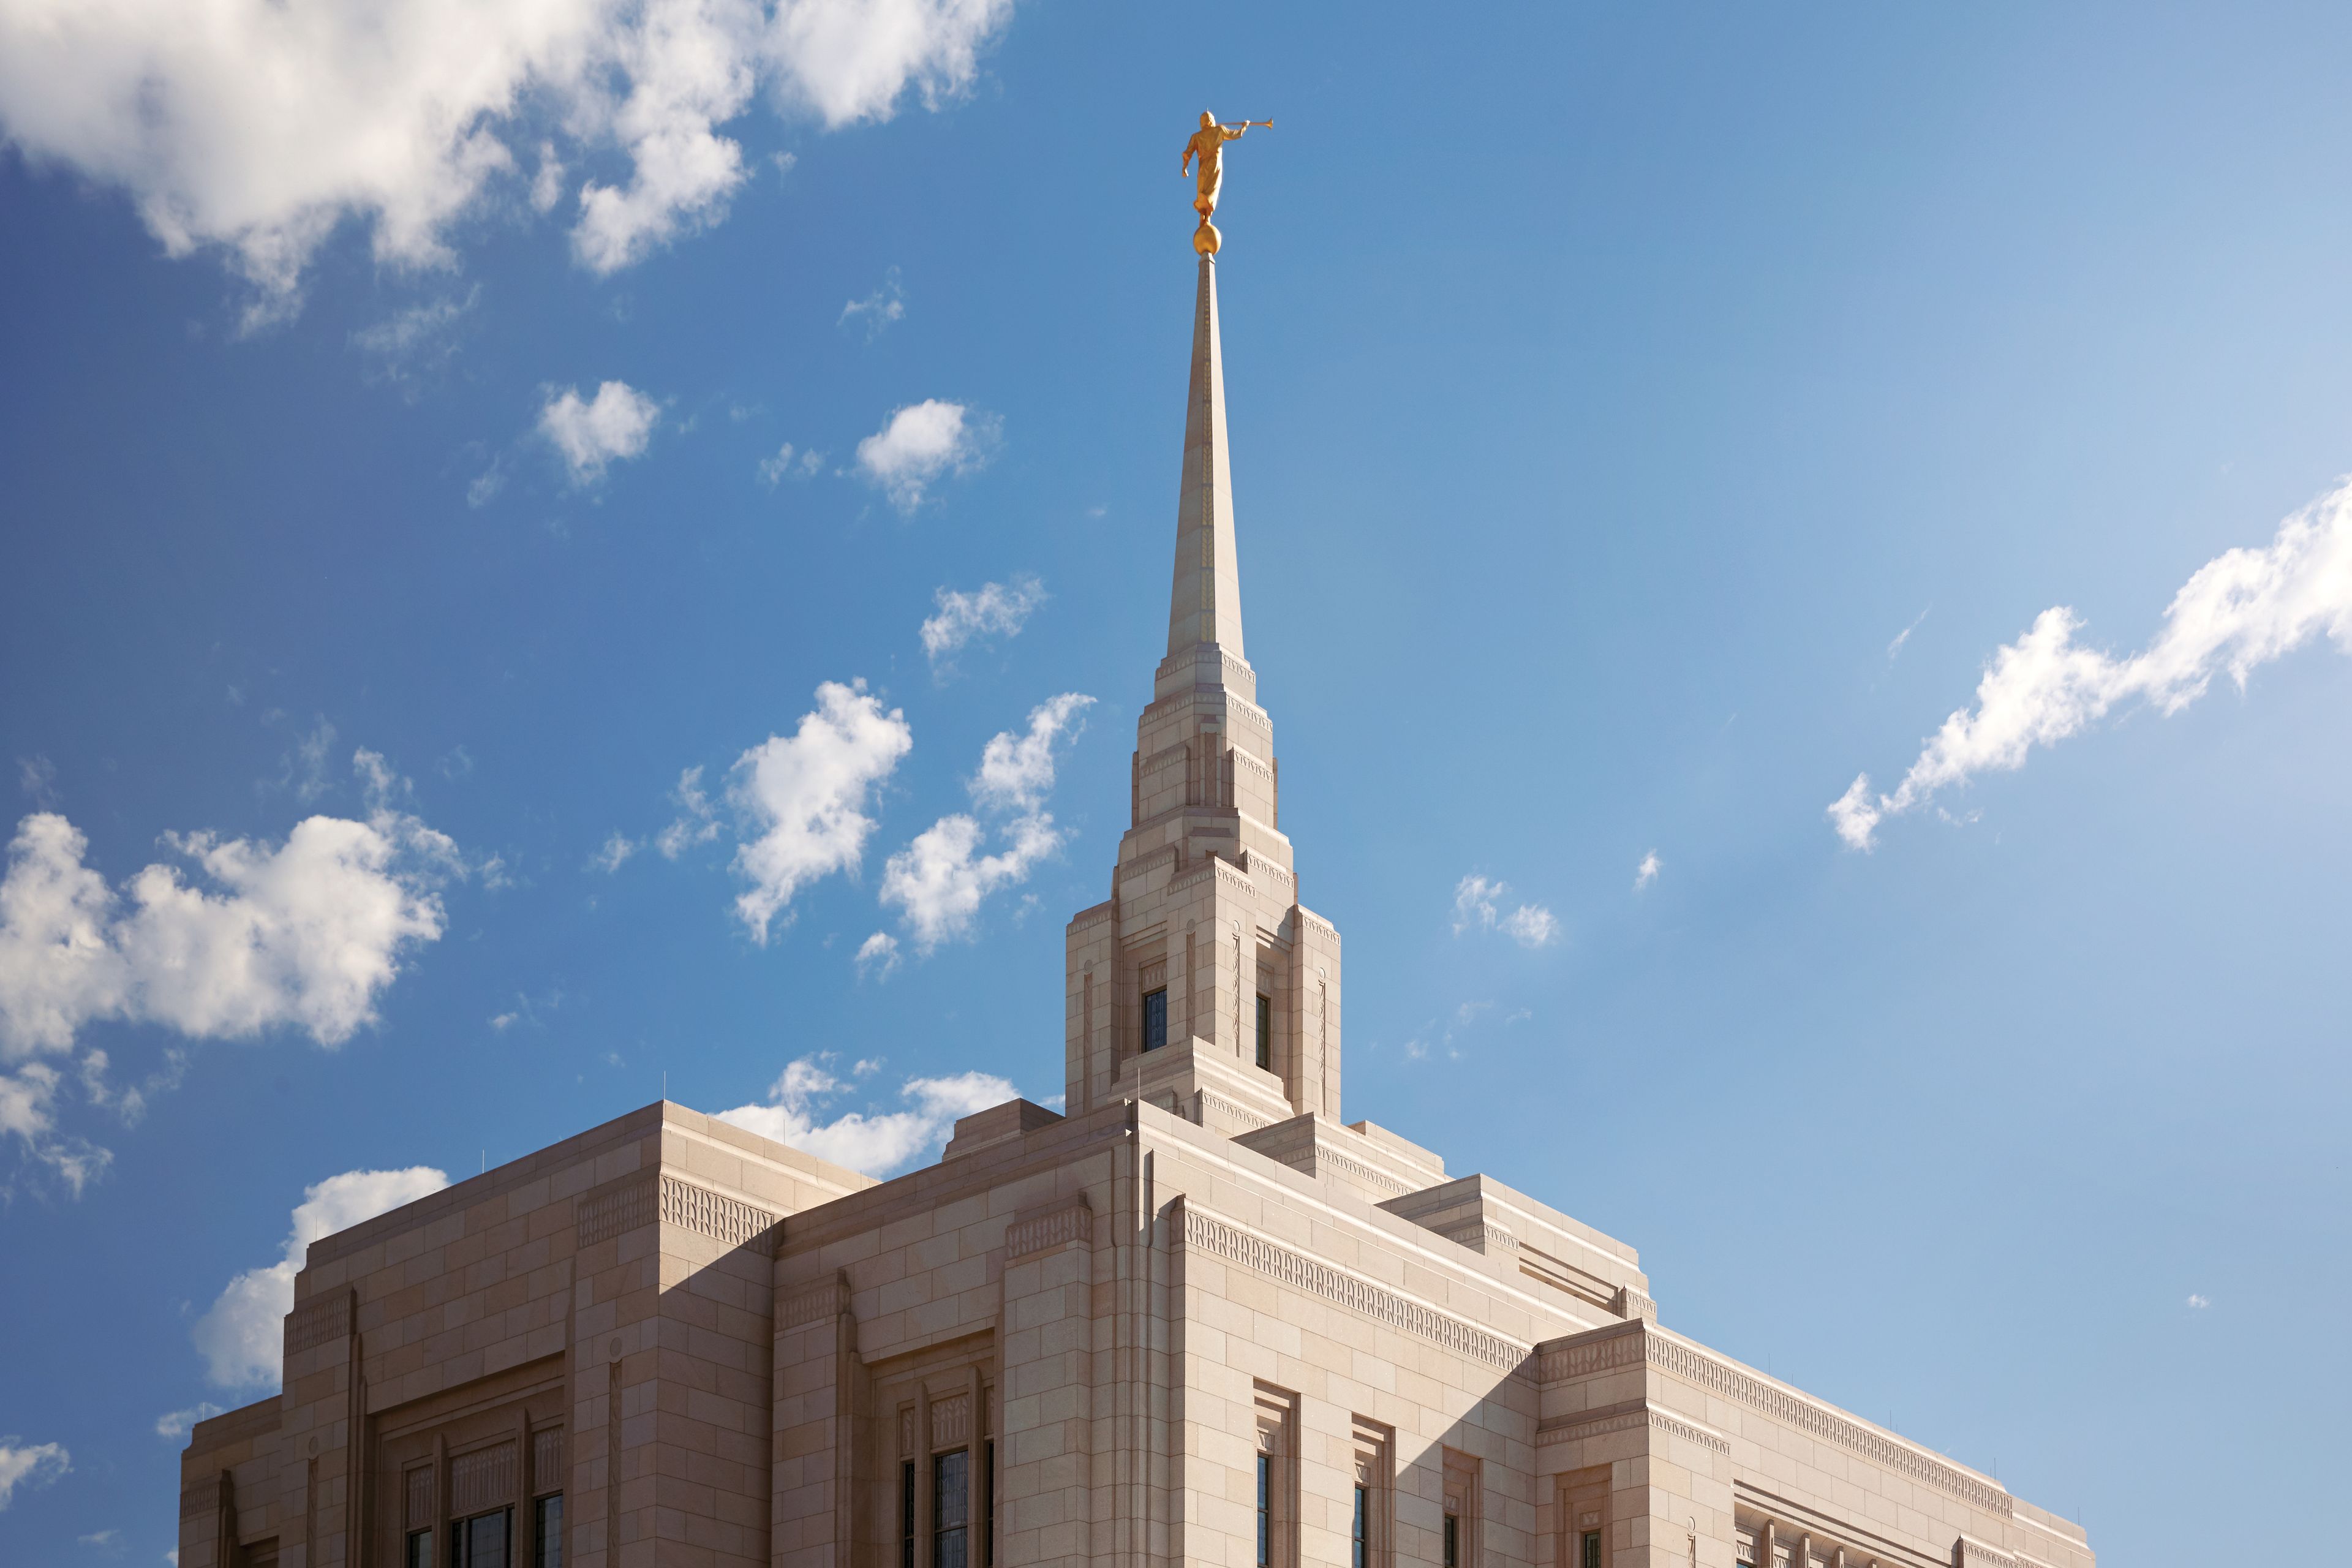 The Ogden Utah Temple spire, including the exterior of the temple.